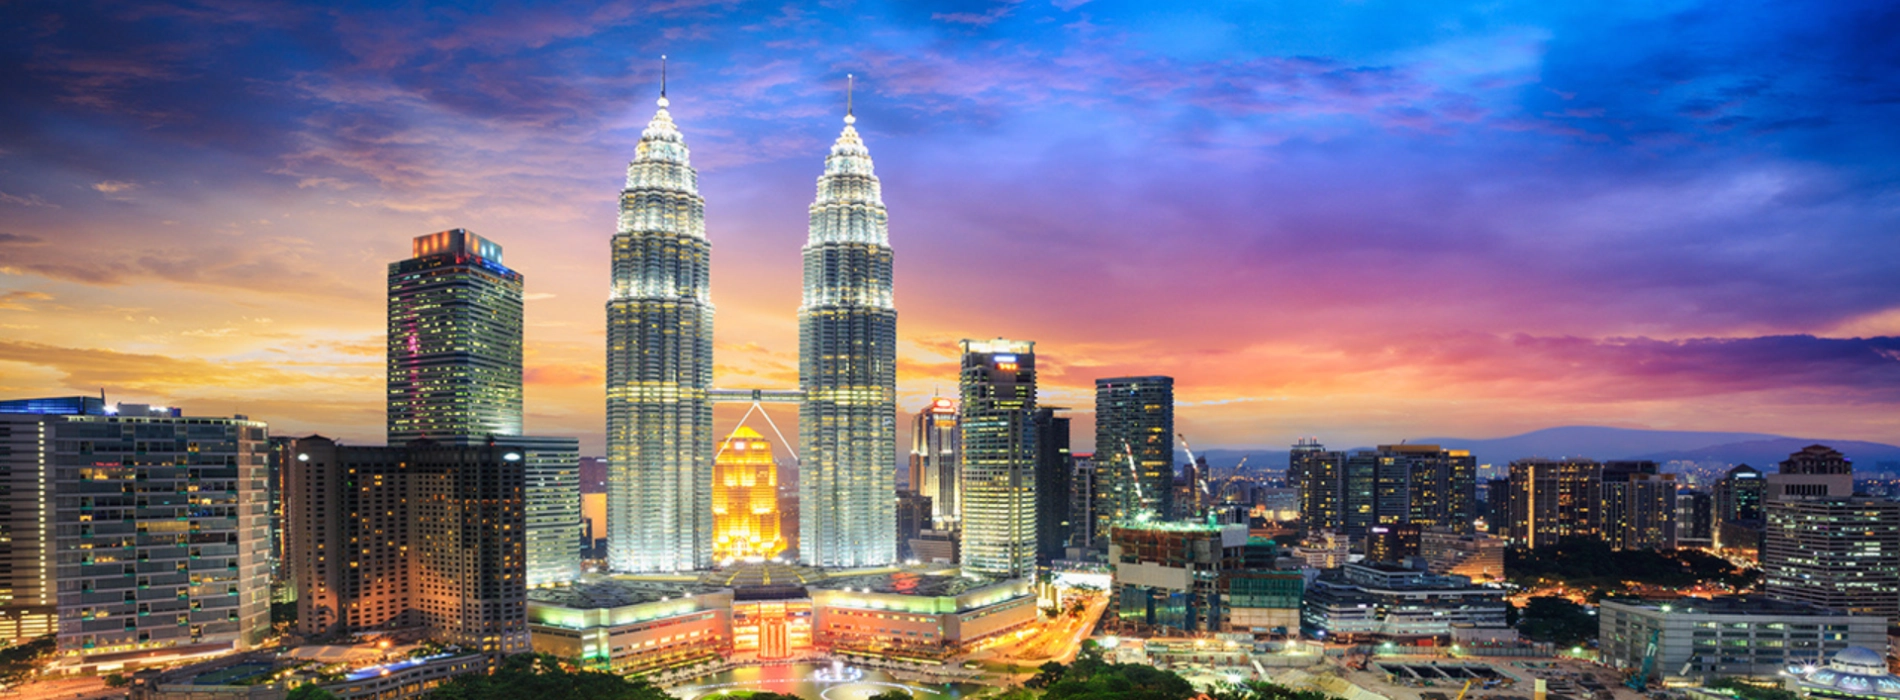 Top 7 things to know before visiting Malaysia